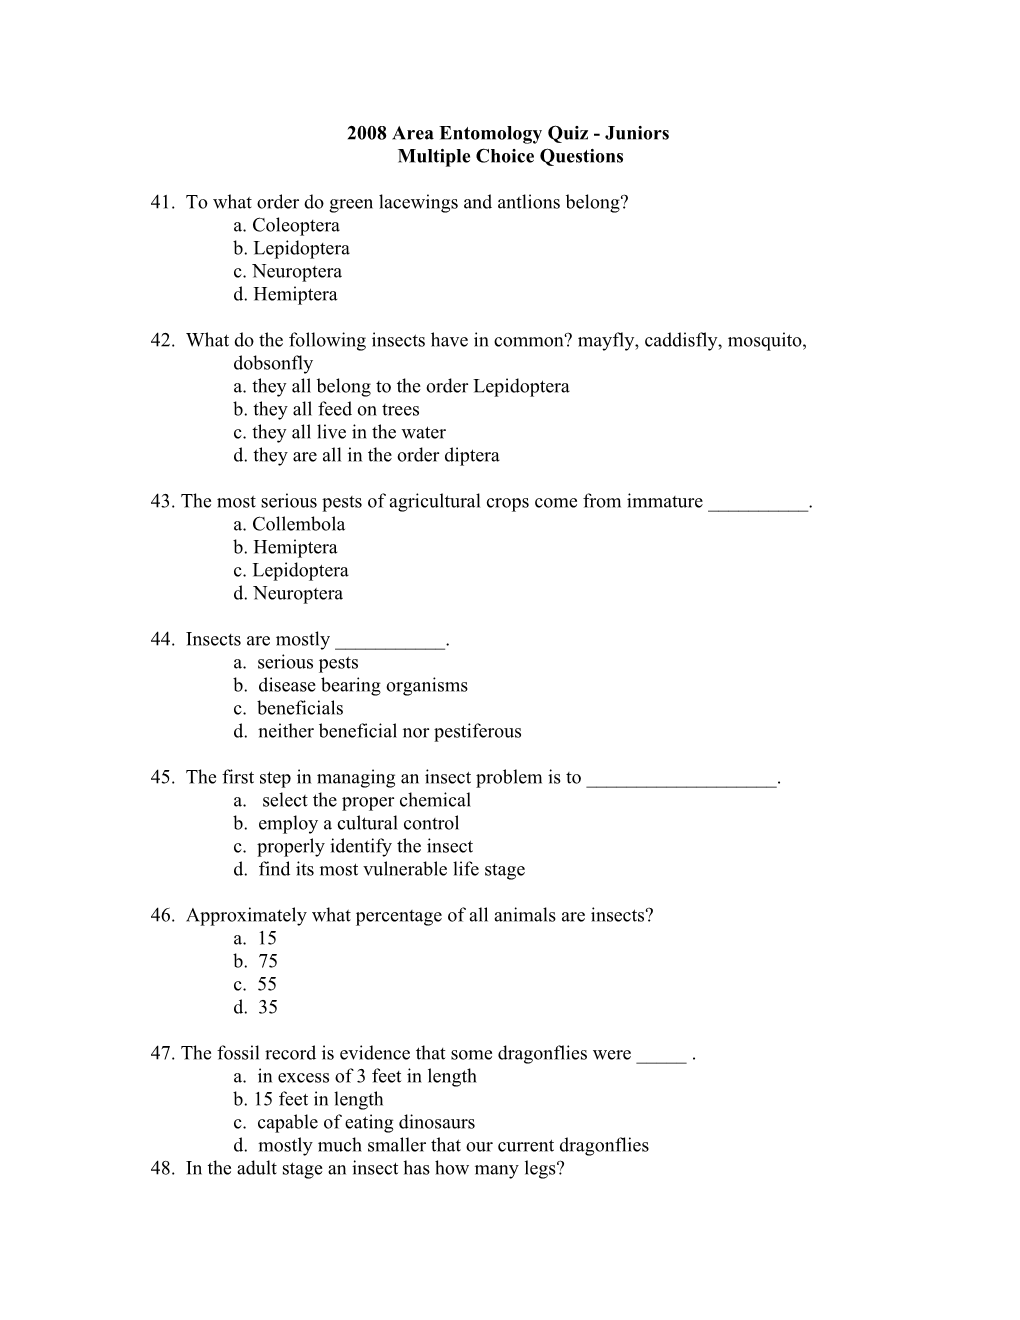 Multiple Choice Questions for County/Area 4-H/FFA Contest - 1998